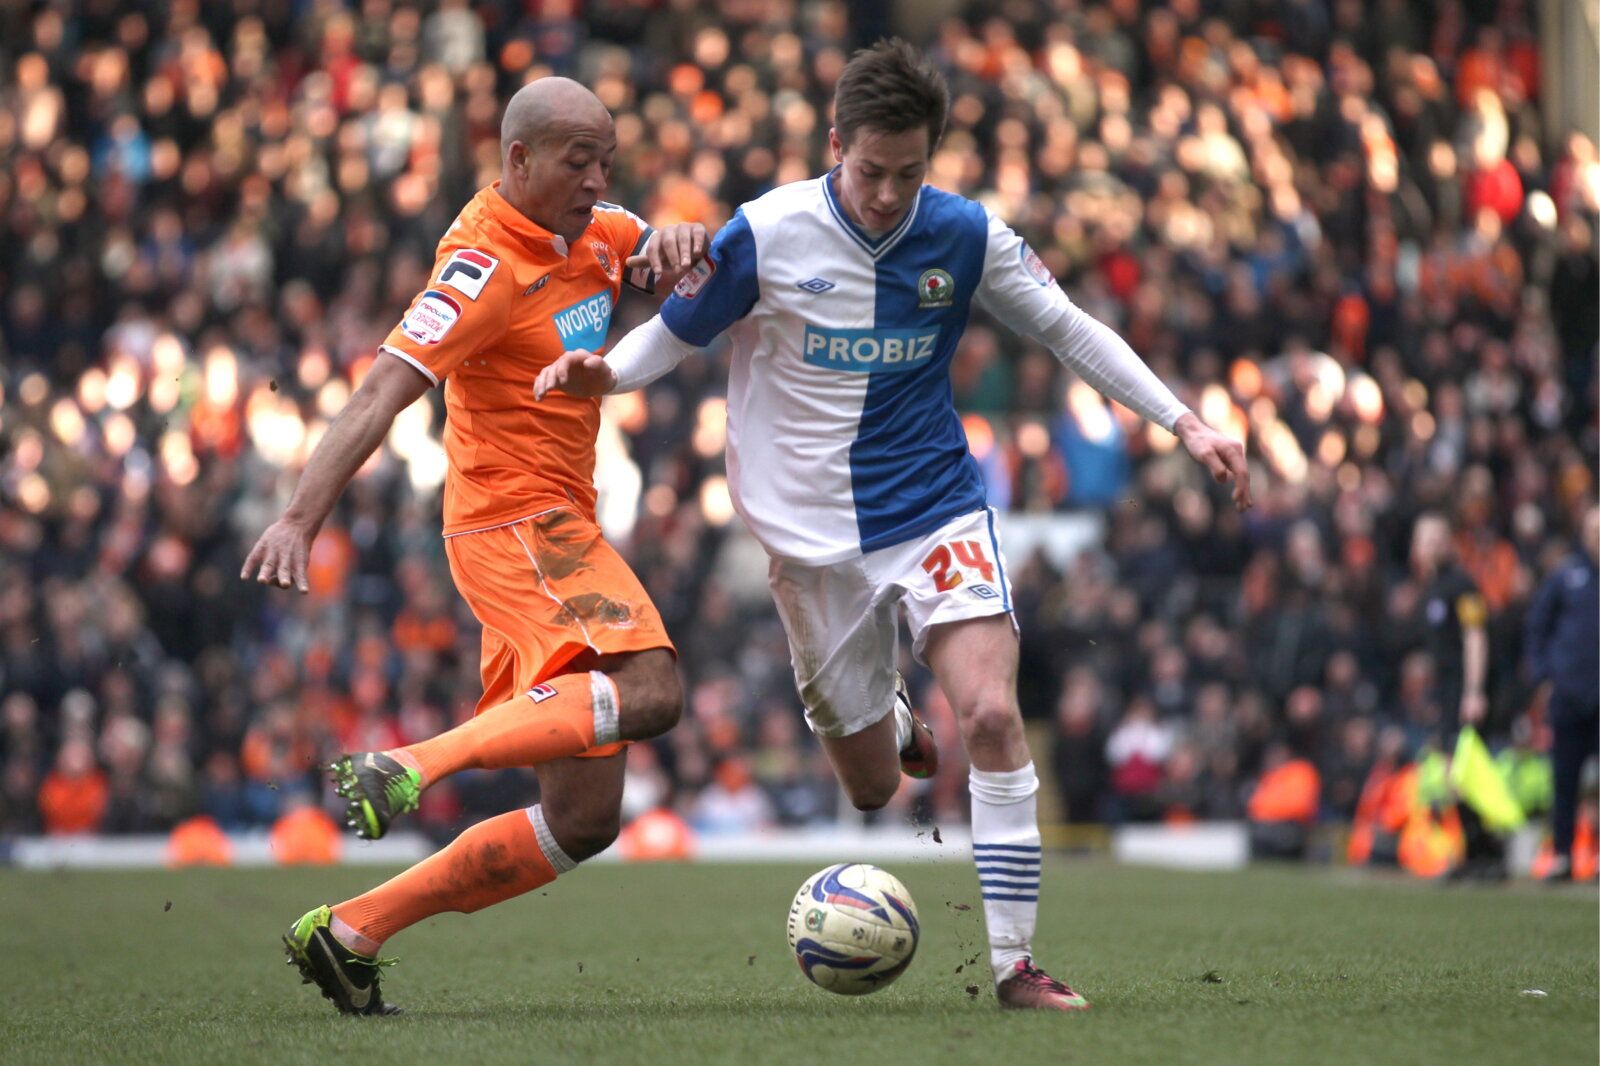 Football - Blackburn Rovers v Blackpool - npower Football League Championship  - Ewood Park - 12/13 - 29/3/13 
Blackburn's Josh Morris in action against Blackpool's Alex Baptiste  
Mandatory Credit: Action Images / Carl Recine 
EDITORIAL USE ONLY. No use with unauthorized audio, video, data, fixture lists, club/league logos or live services. Online in-match use limited to 45 images, no video emulation. No use in betting, games or single club/league/player publications.  Please contact your accou